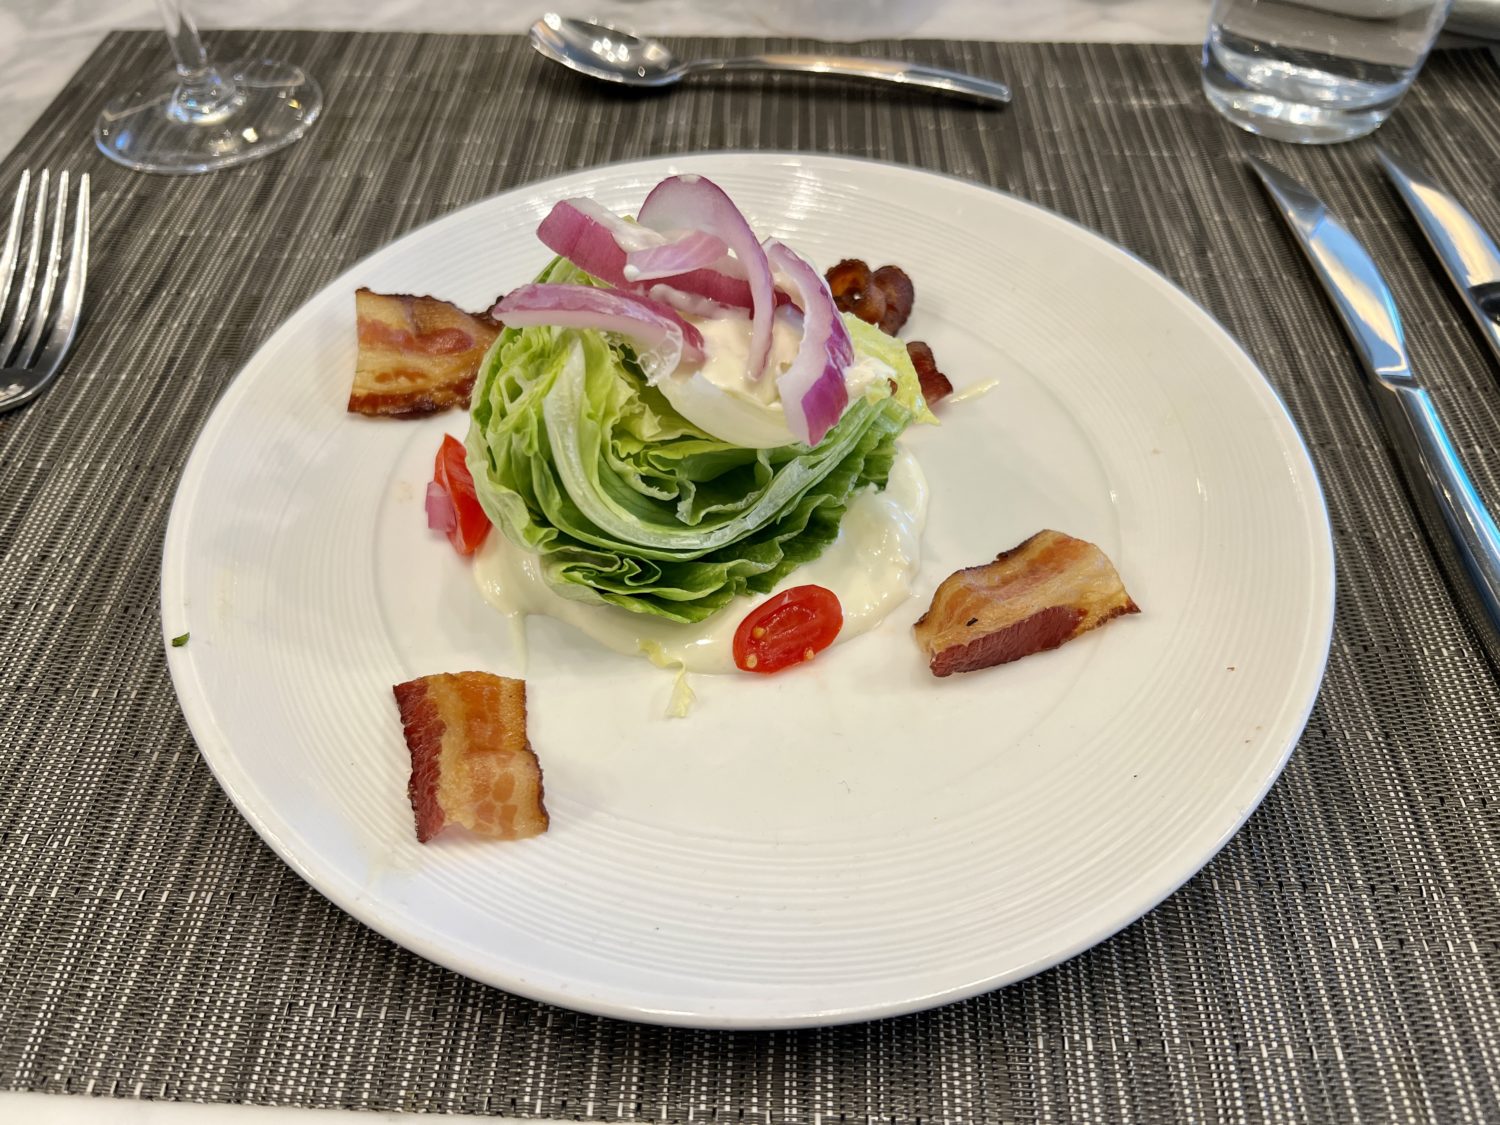 salad at united polaris lounge chicago  Beautiful But Busy: United Polaris Lounge Chicago-O&#039;Hare (ORD) Review – Thrifty Traveler &#8211; Thrifty Traveler united polaris lounge chicago salad scaled